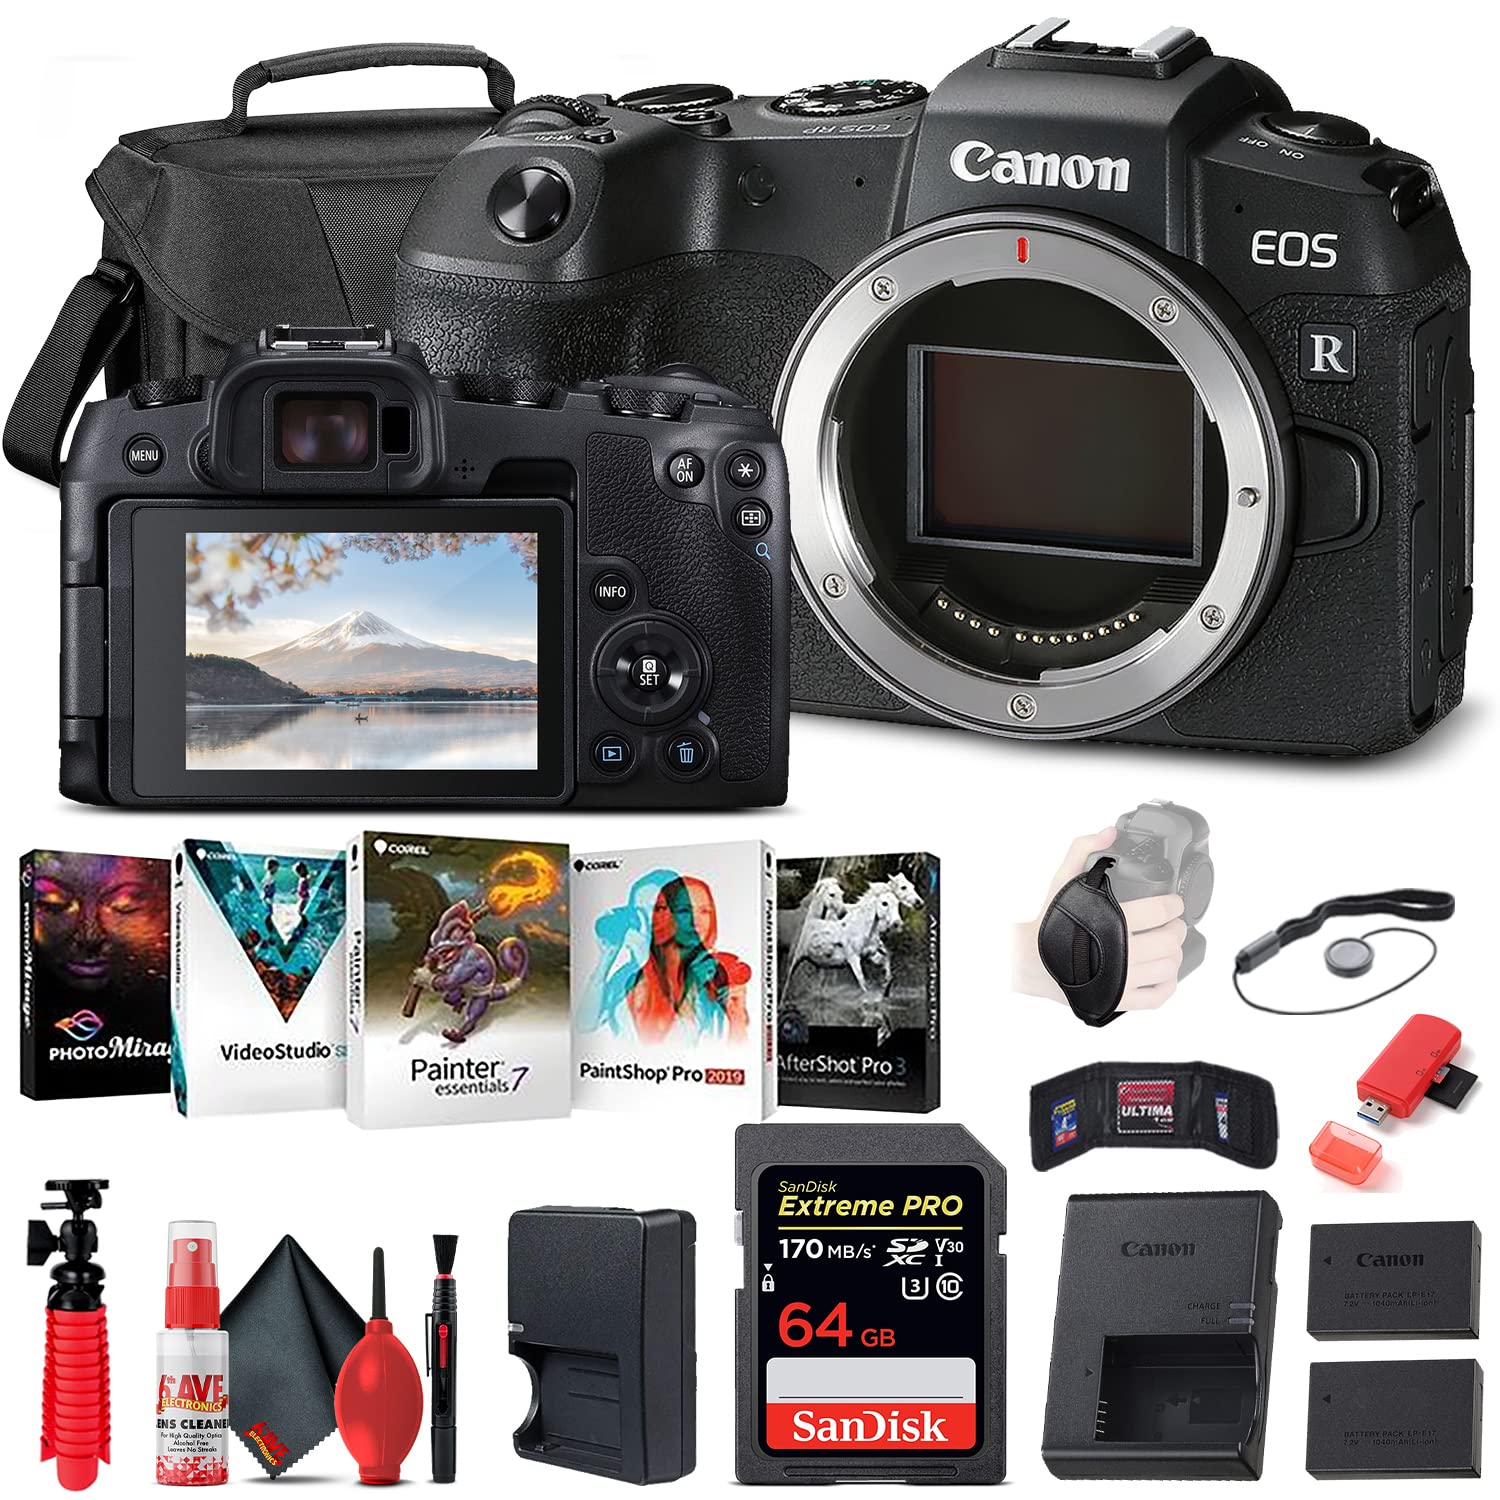 Canon EOS RP Mirrorless Digital Camera (Body Only) (3380C002) + 64GB Memory Card + Case + Corel Photo Software + LPE17 Battery + External Charger + Card Reader + Flex Tripod + More (Renewed)